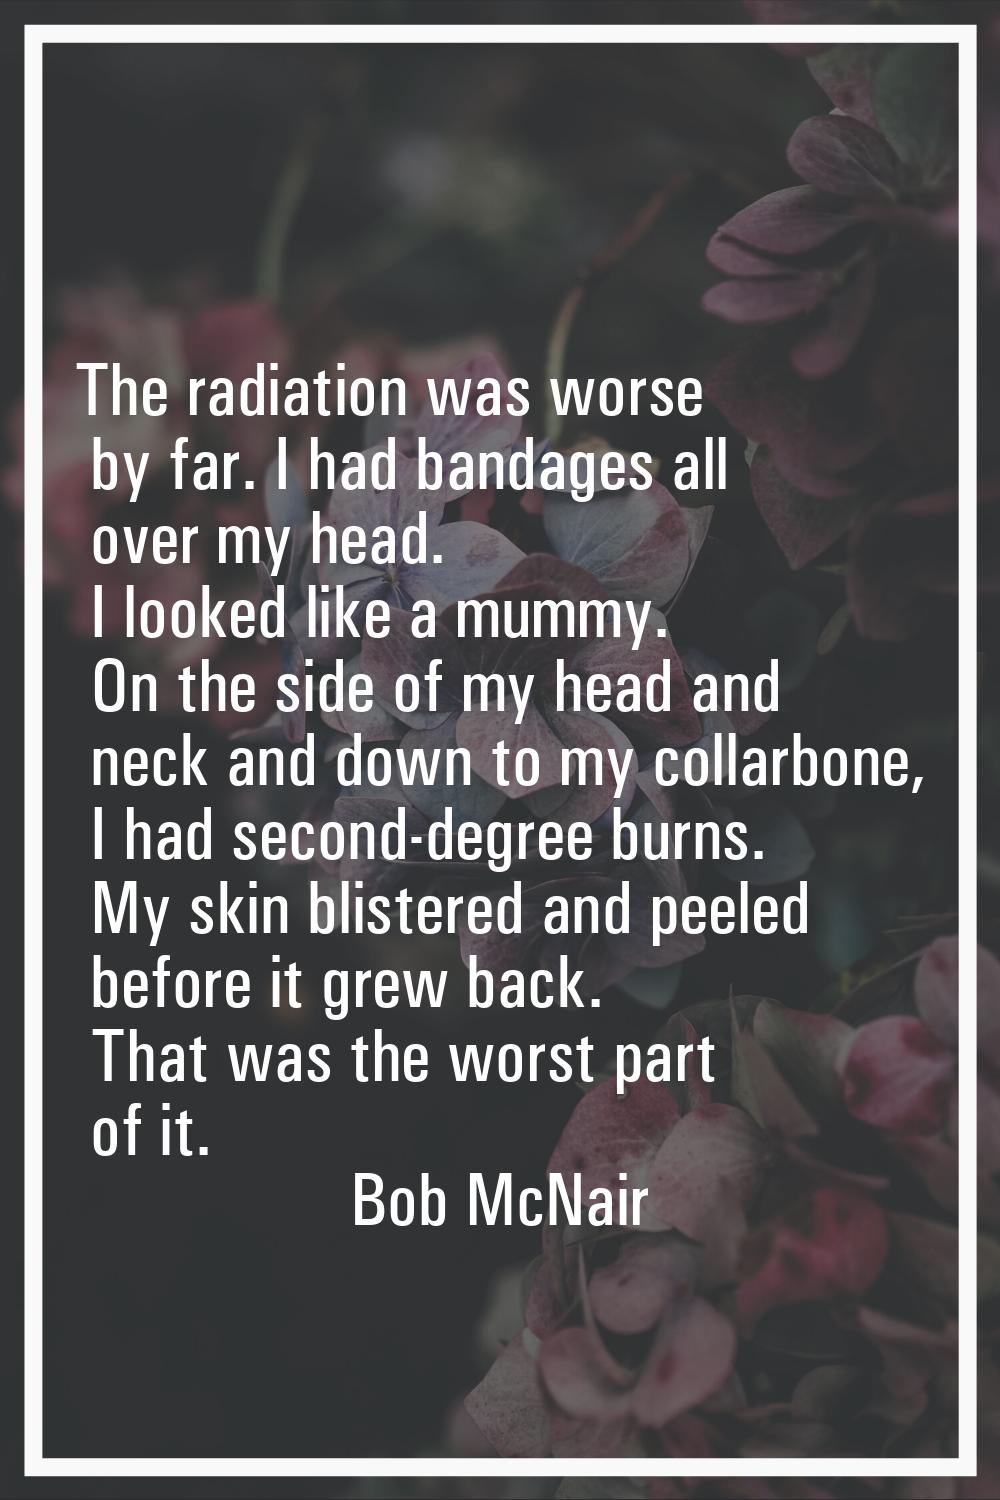 The radiation was worse by far. I had bandages all over my head. I looked like a mummy. On the side